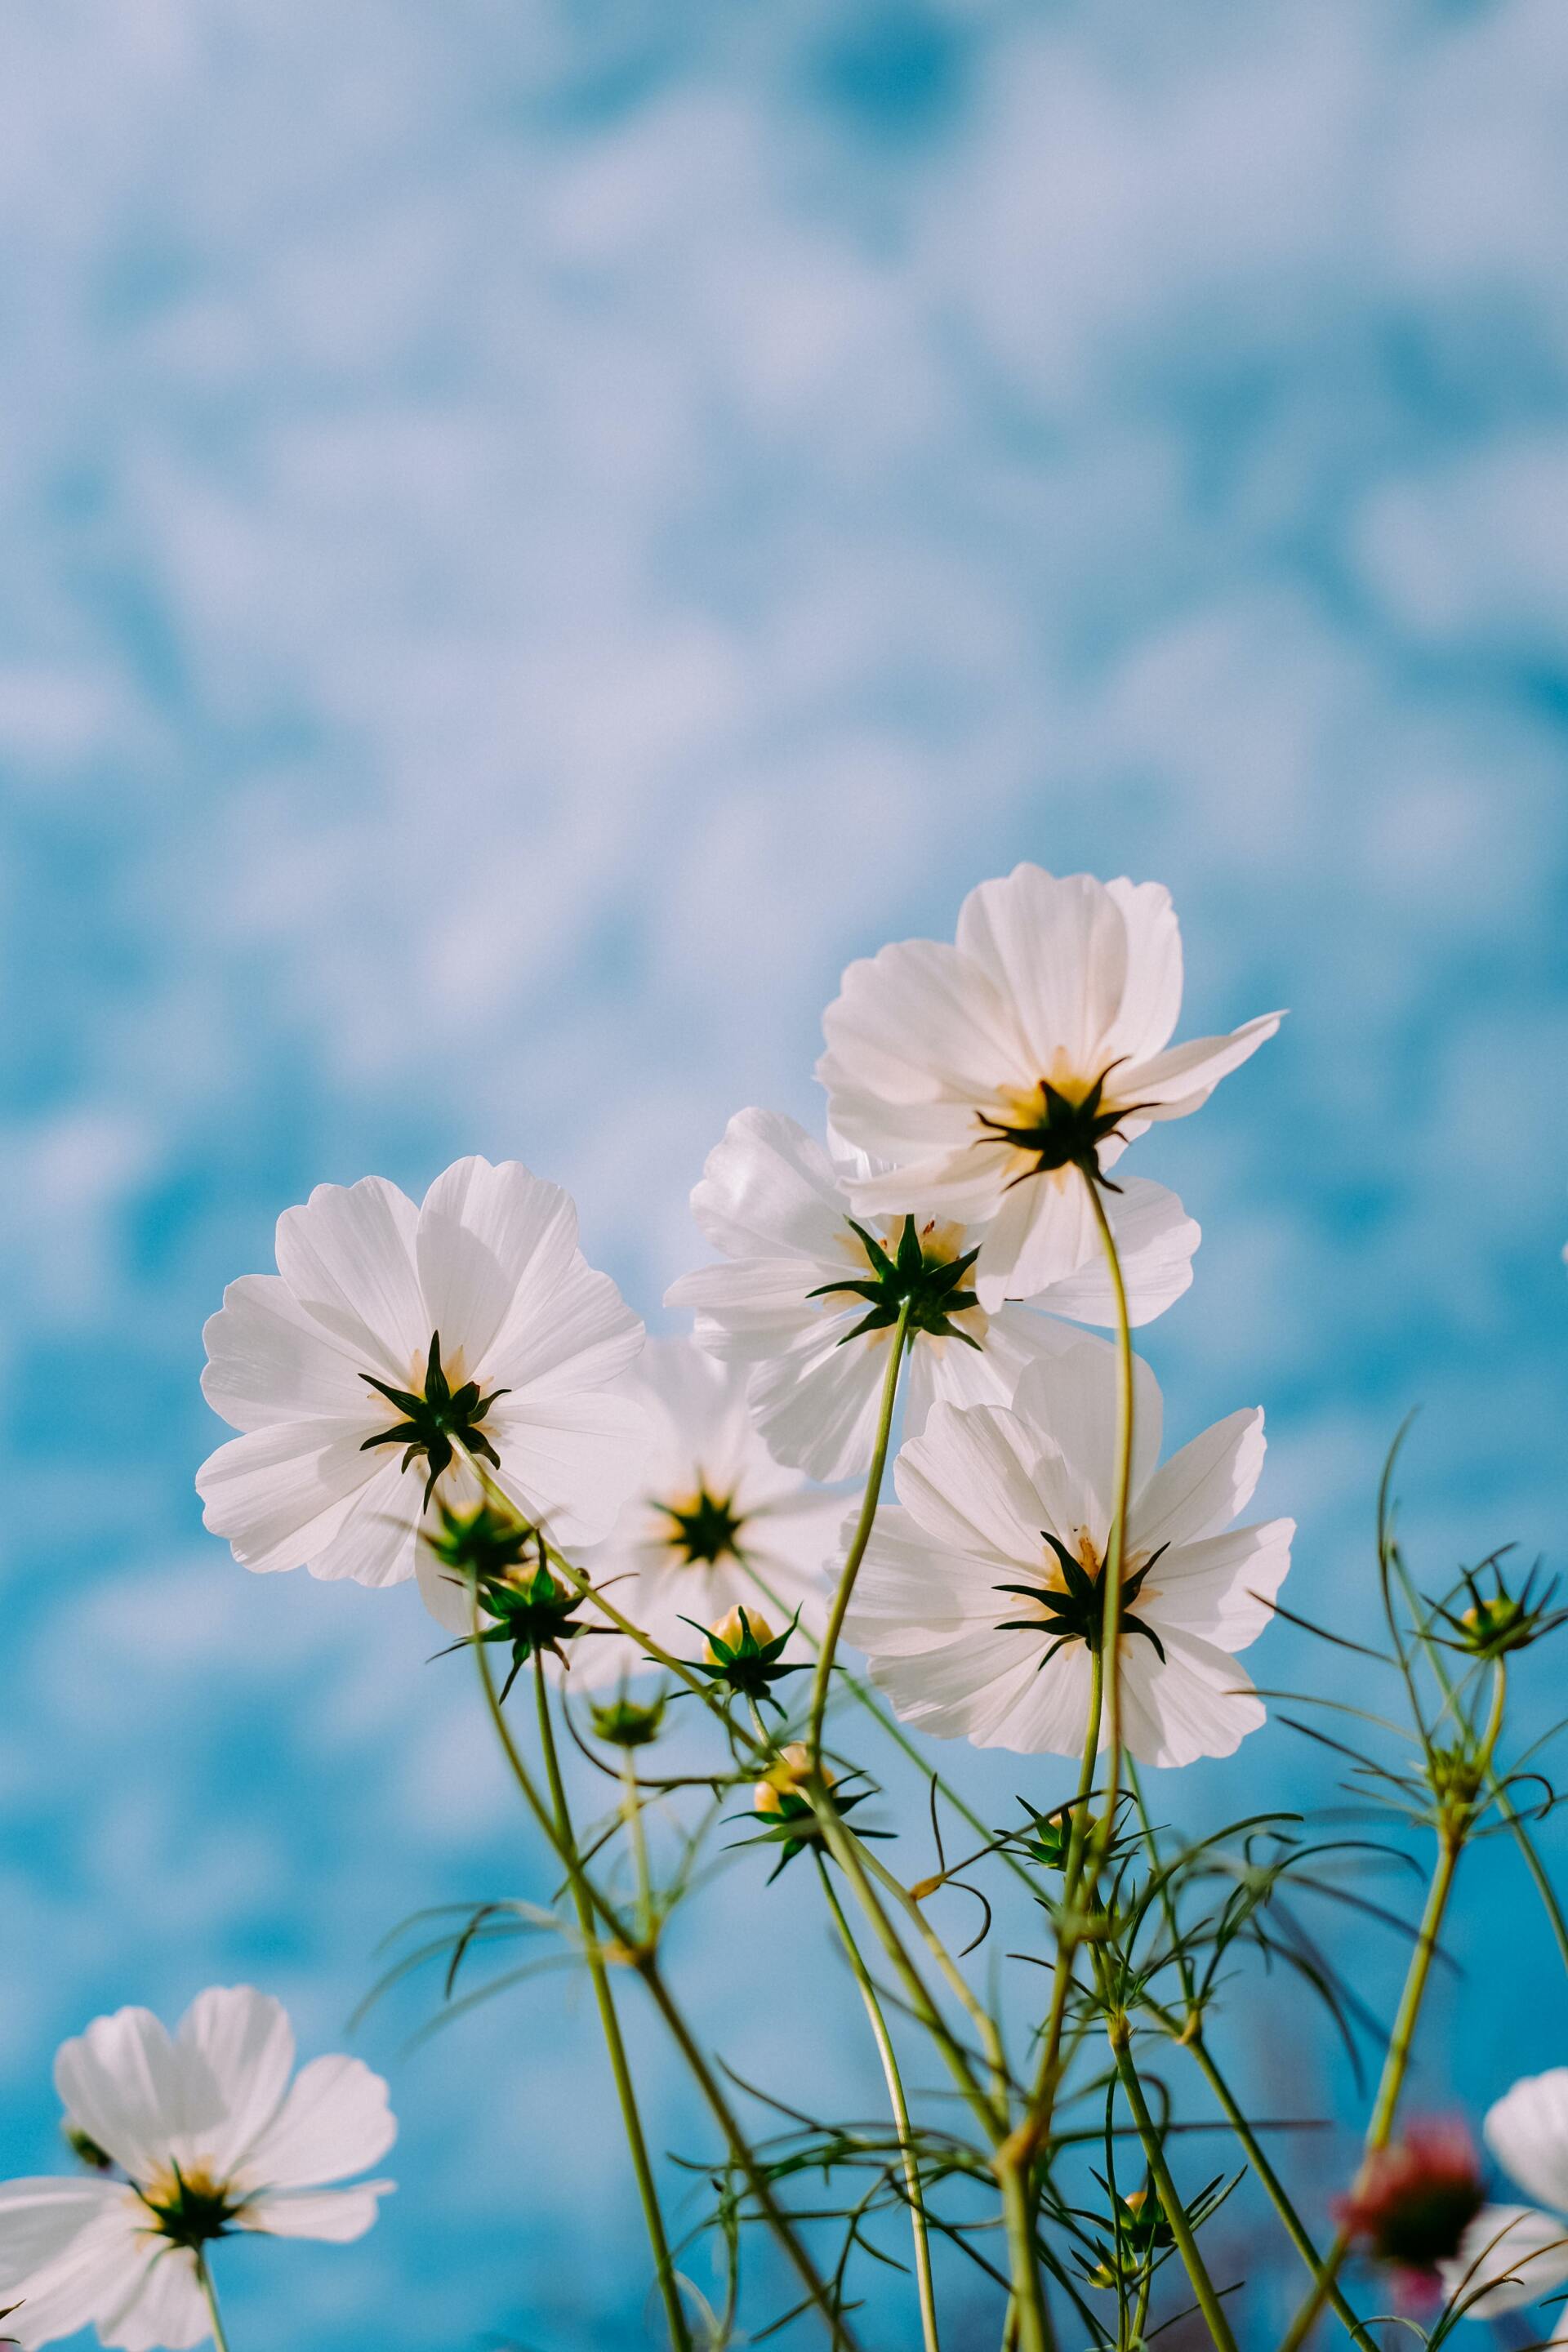 White flowers reaching towards blue sky with gentle clouds